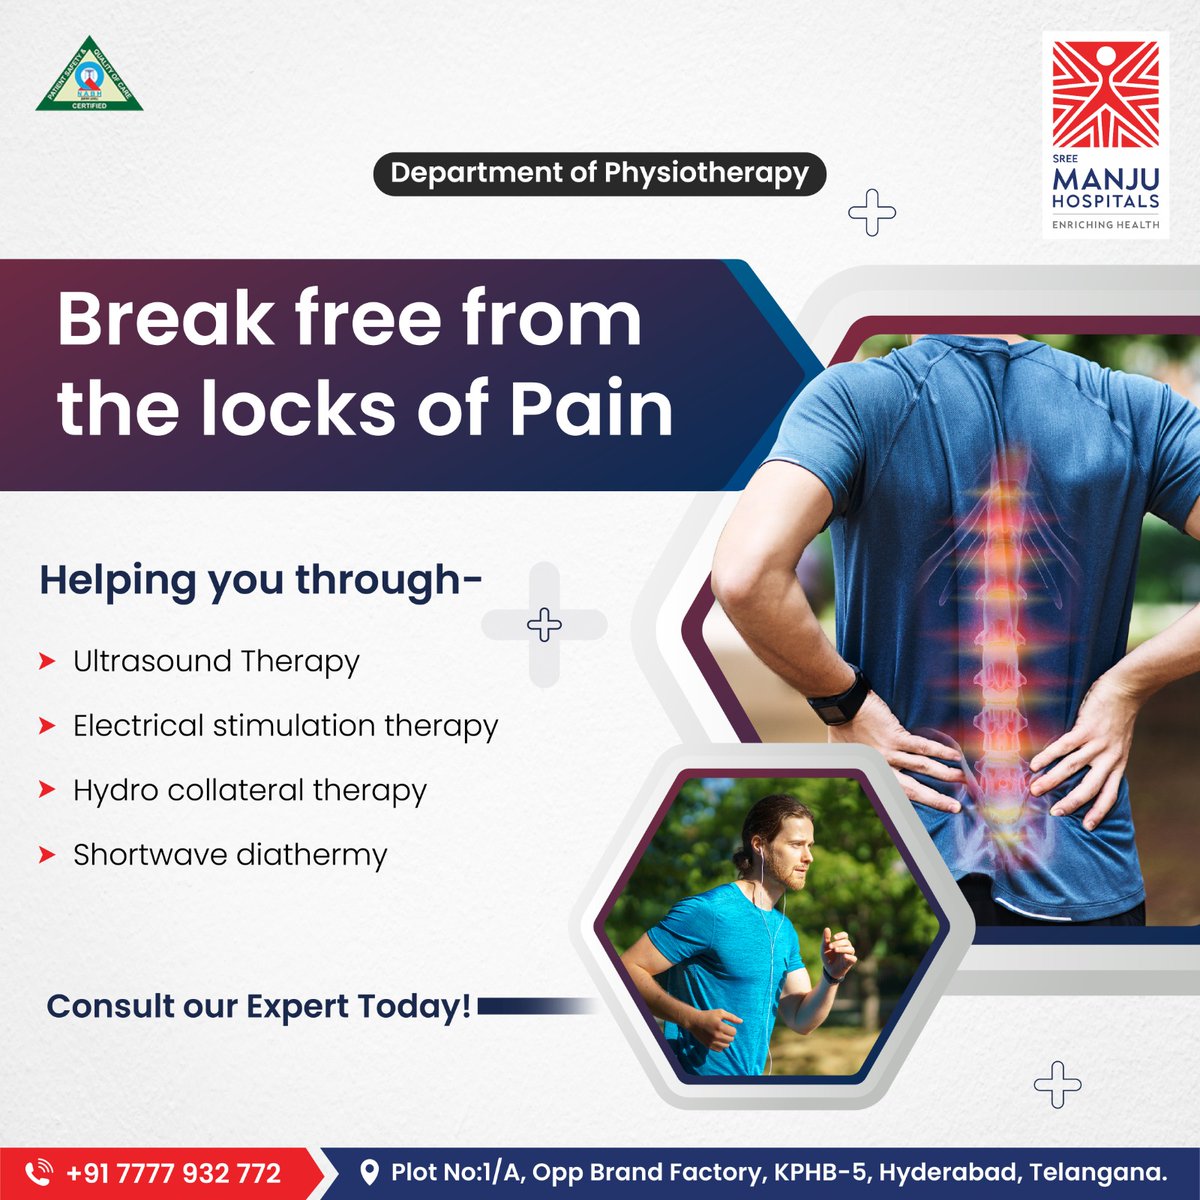 Experience the comfort of recovery at Sree Manju Hospitals. We offer help to restore your strength and mobility with our expert physiotherapy services. Our dedicated team of physiotherapists is committed to helping you recover from injuries and conditions.
#physiotherapycare